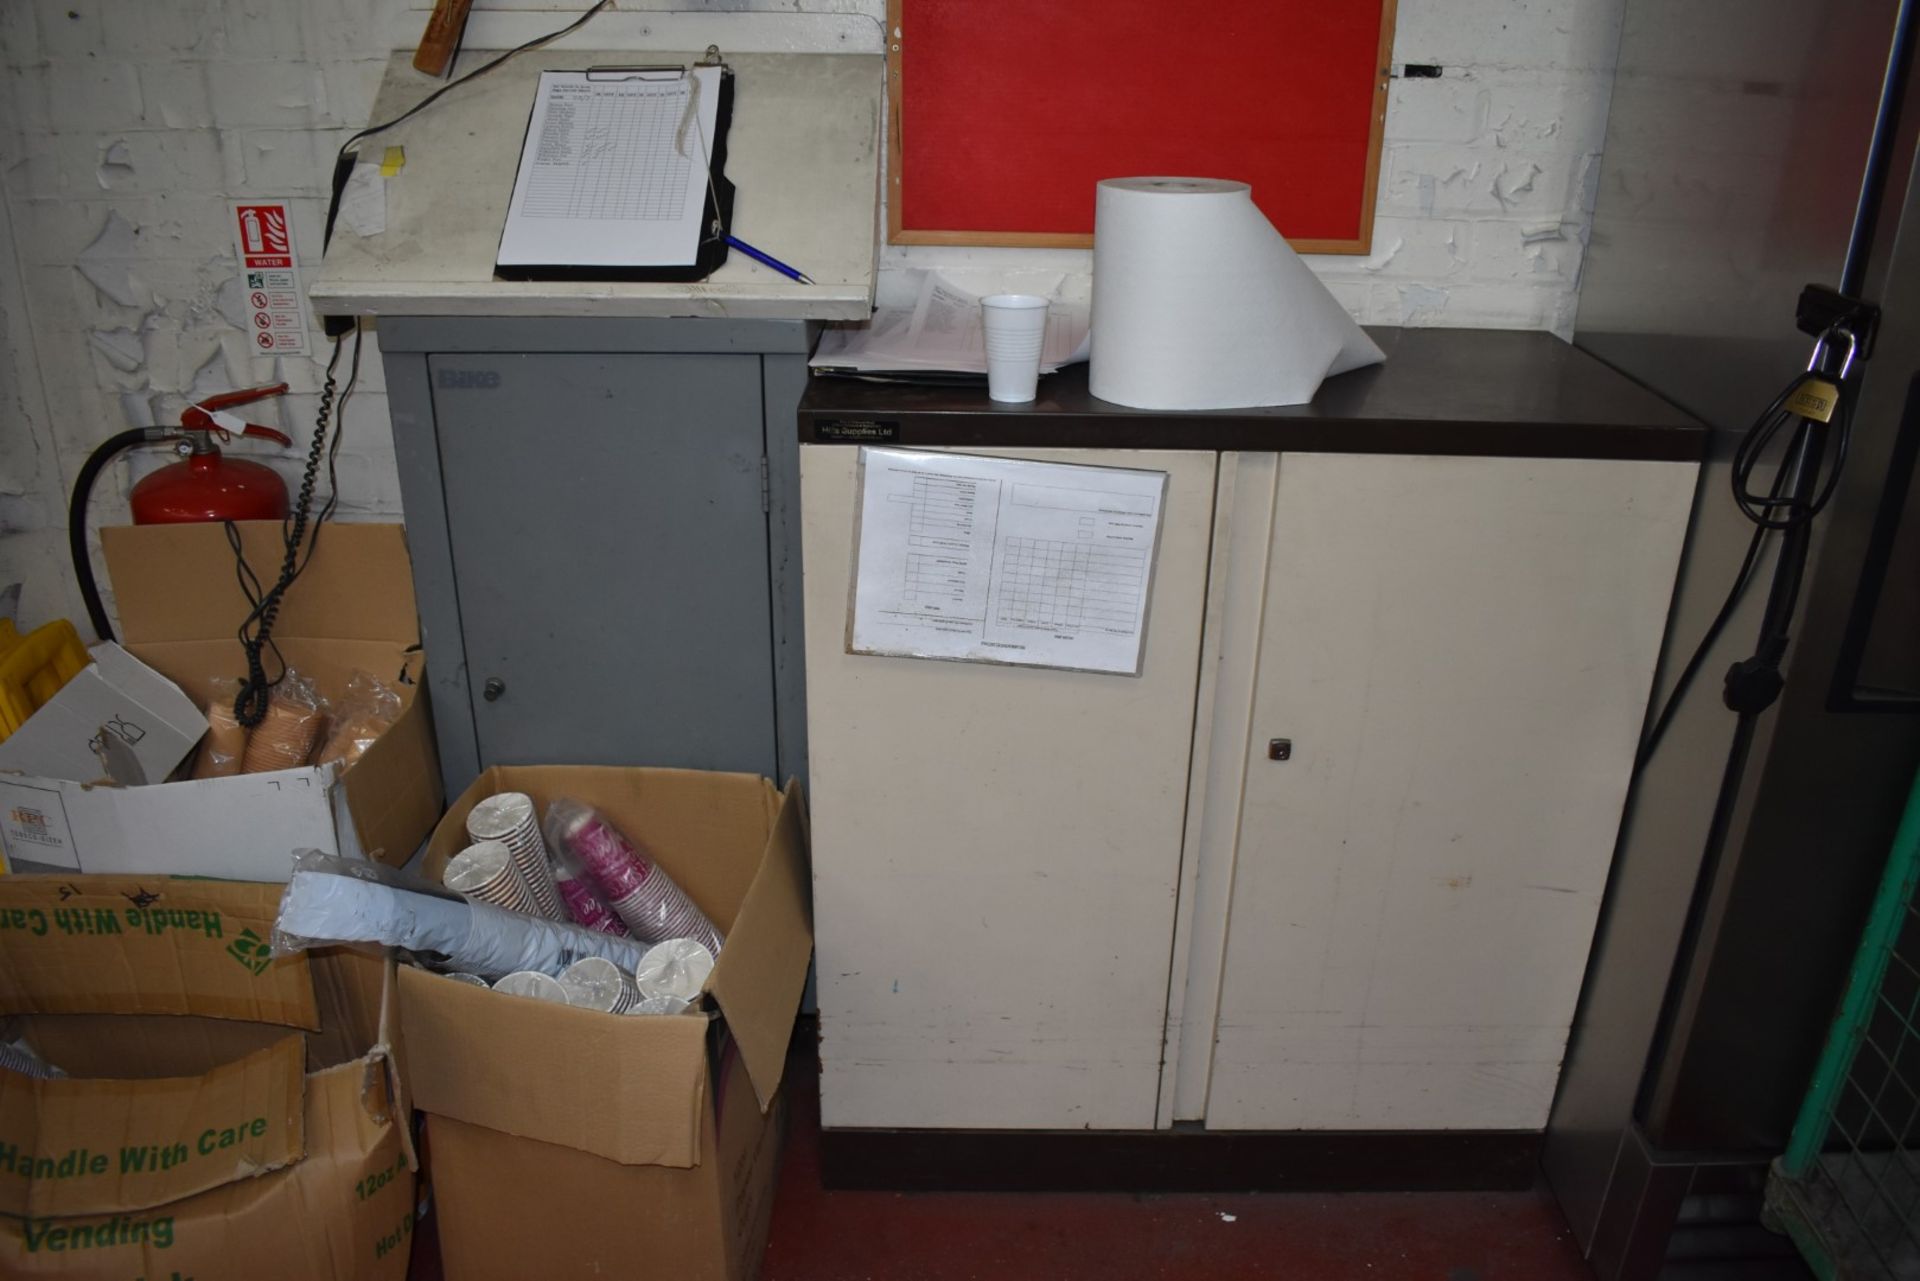 1 x Assorted Lot of Office Furniture - Includes Two Desks, 1 x Table, 1 x Filing Cabinet and 2 x - Image 3 of 3